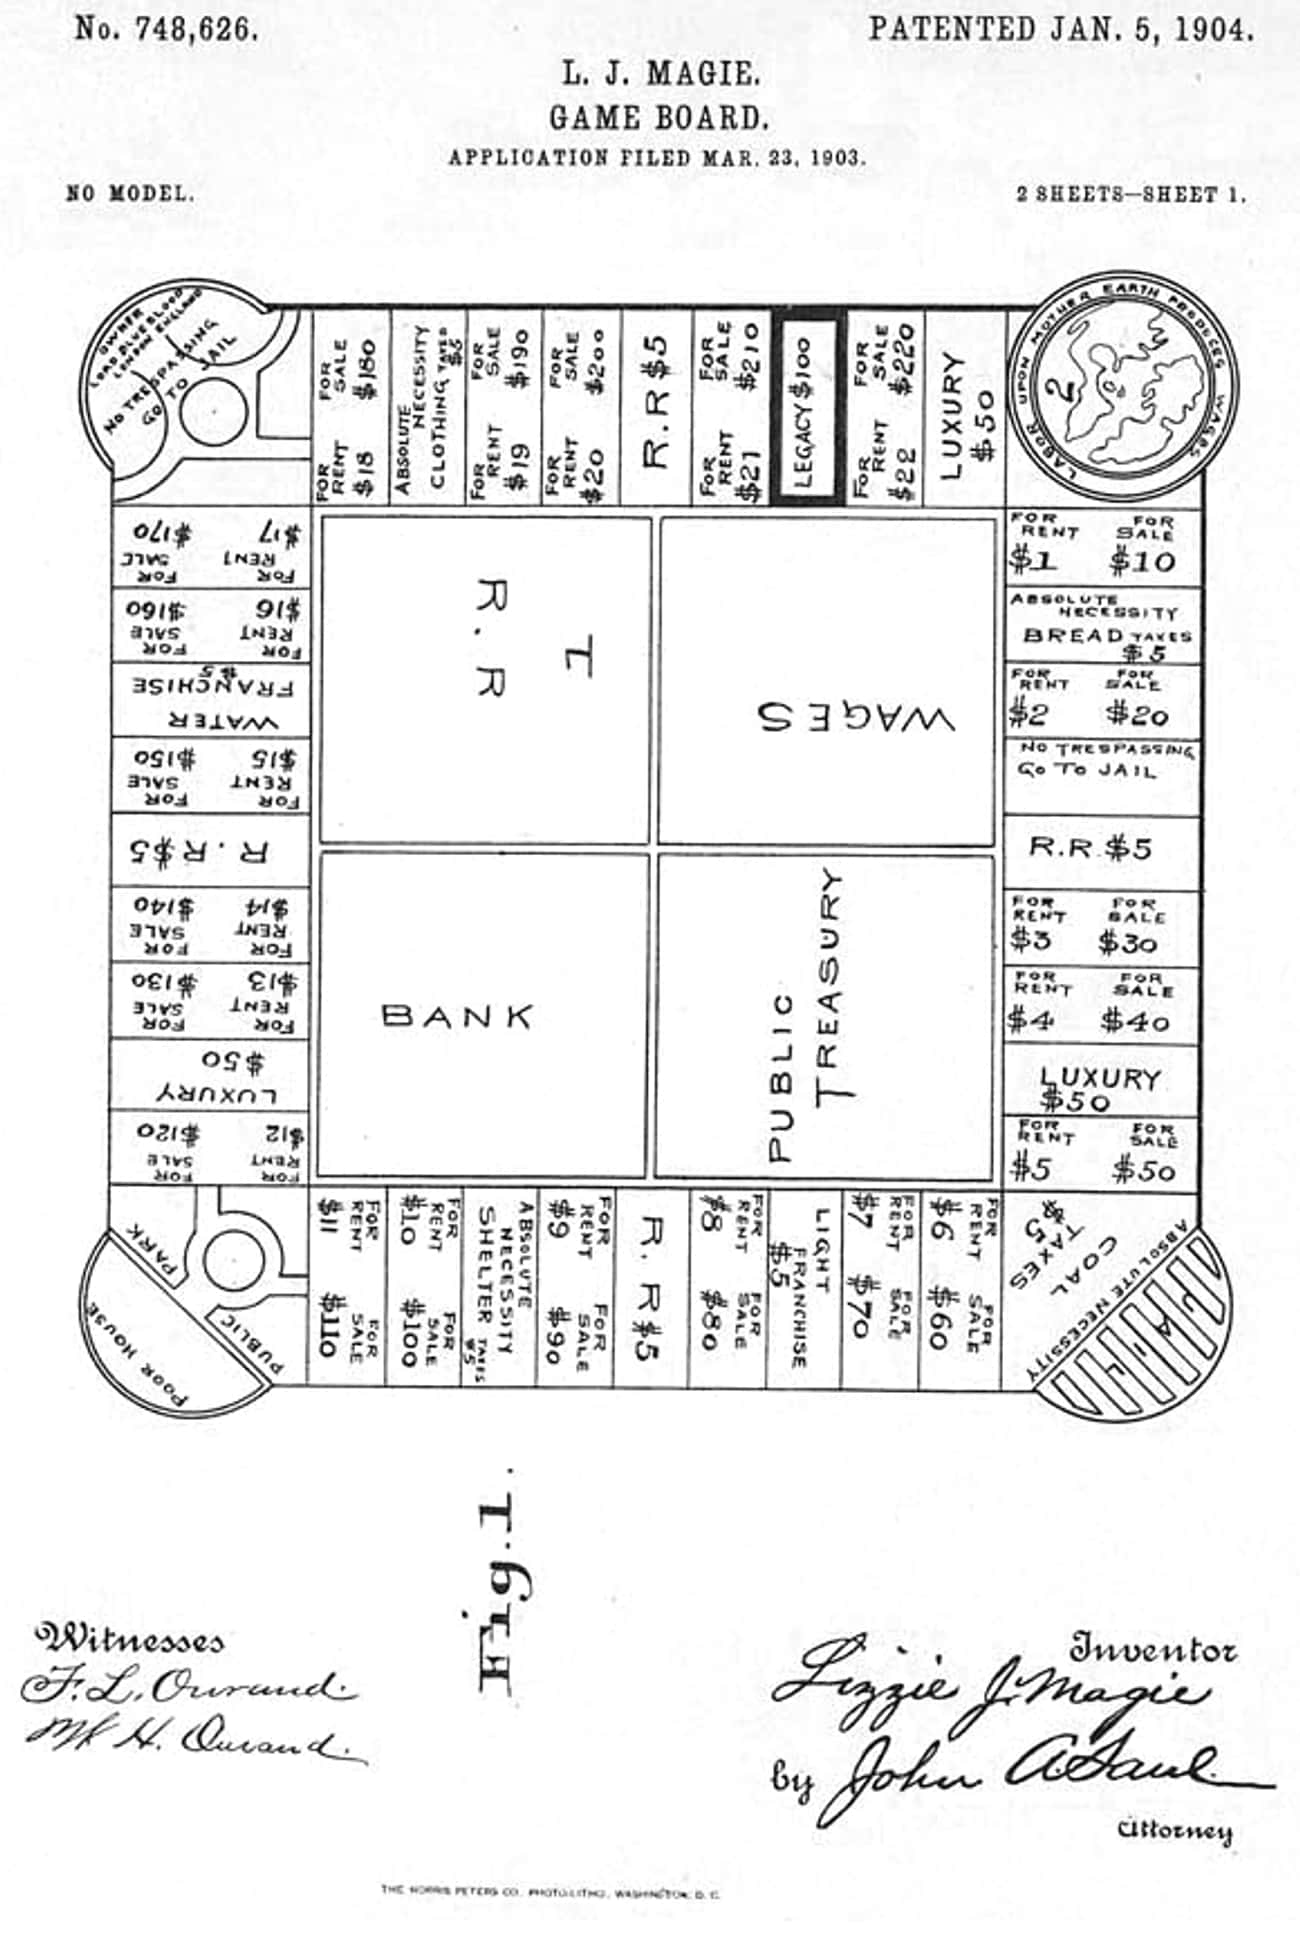 Magie Patented The Landlord’s Game In 1903 